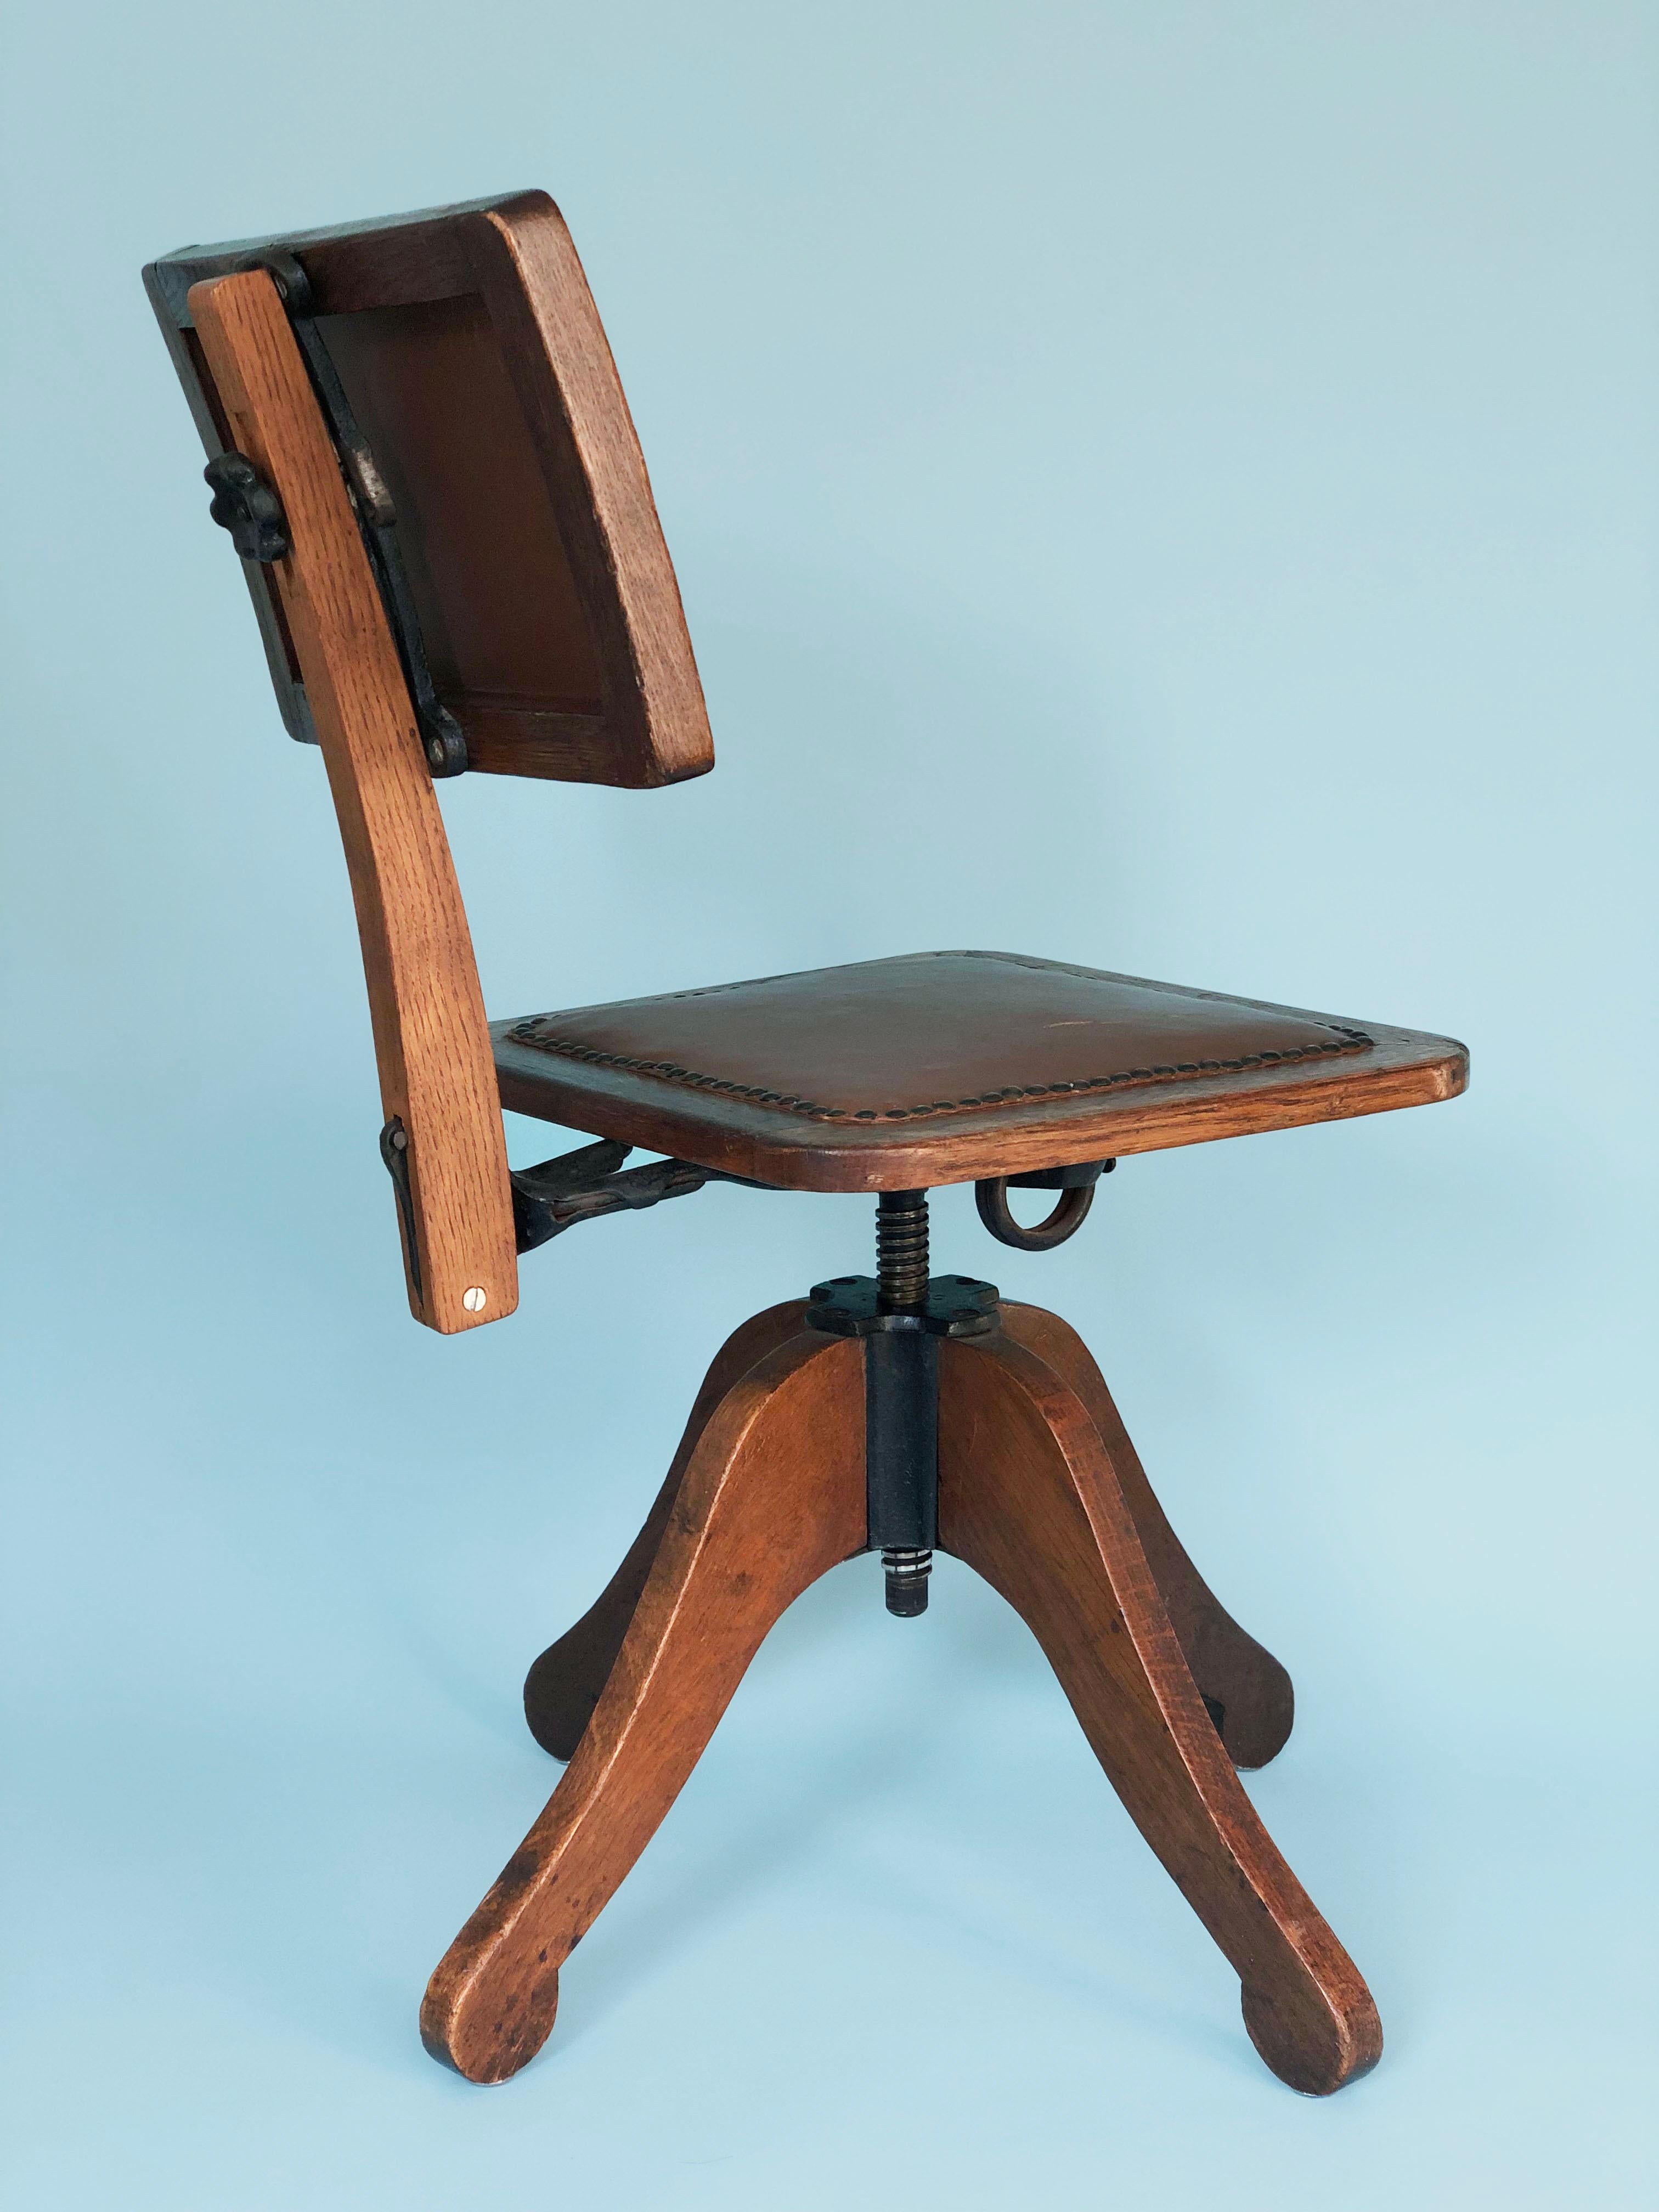 Early 20th century swivel desk chair / music chair, probably France. The oak chair with a cast iron mechanism is easily adjustable in height (42-48 cm). The backrest springs with your back, making it comfortable to sit on.
The seat and back are